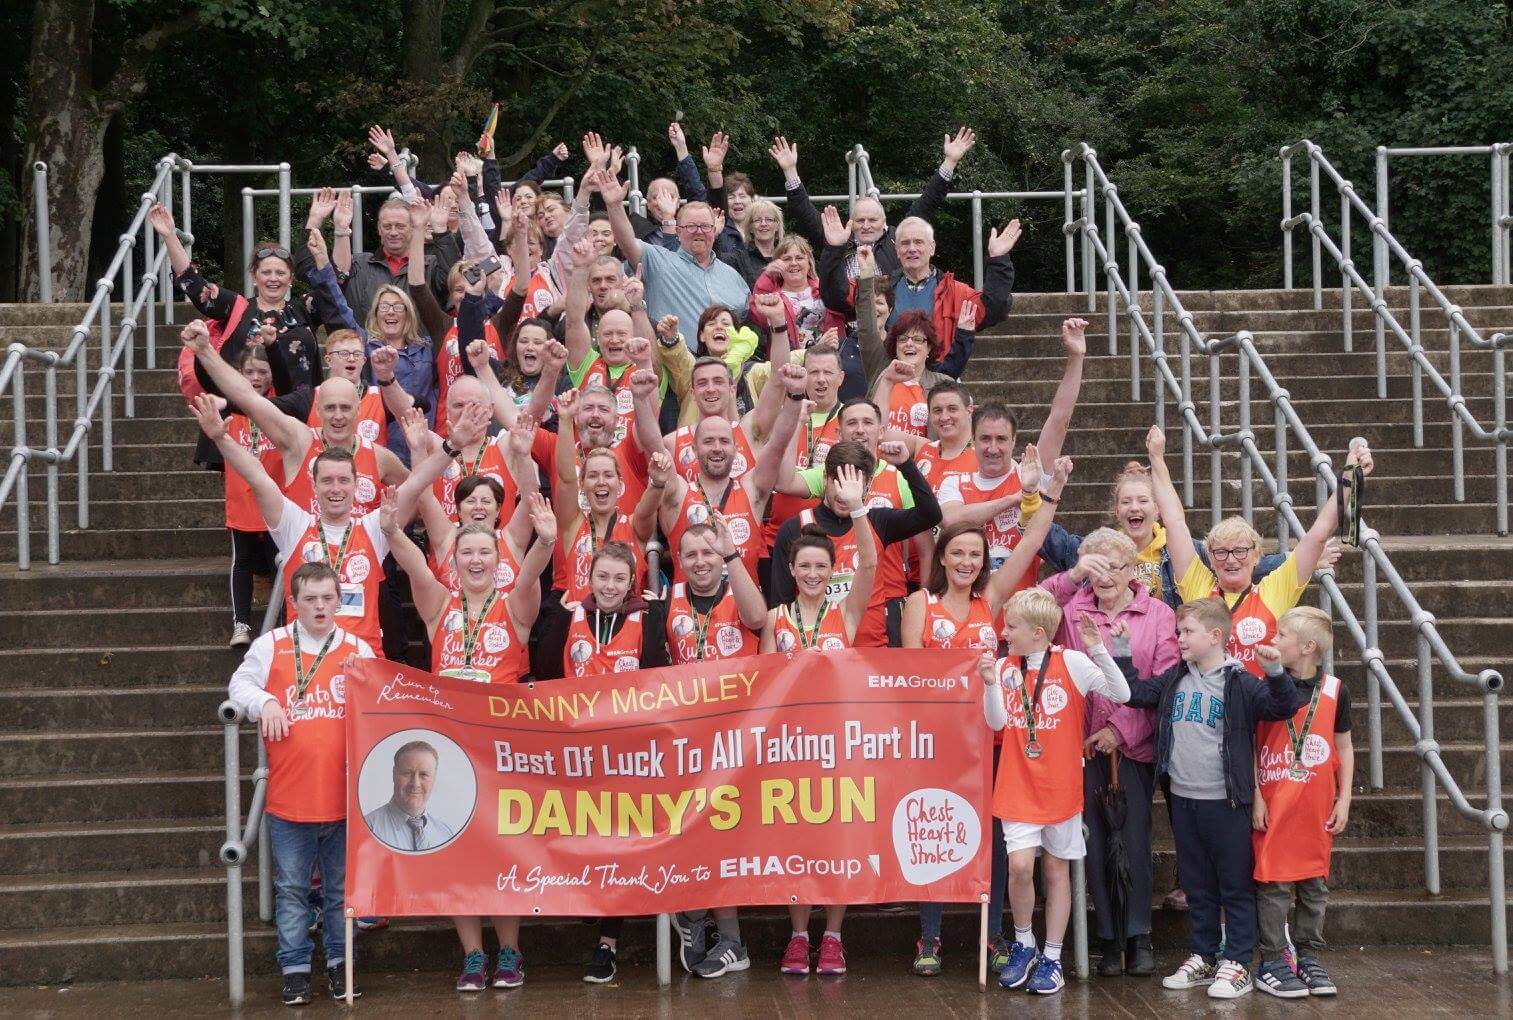 21273620 1710659712574694 3387074409152872561 o - £4,855 raised by Danny's Run for NI CHS!